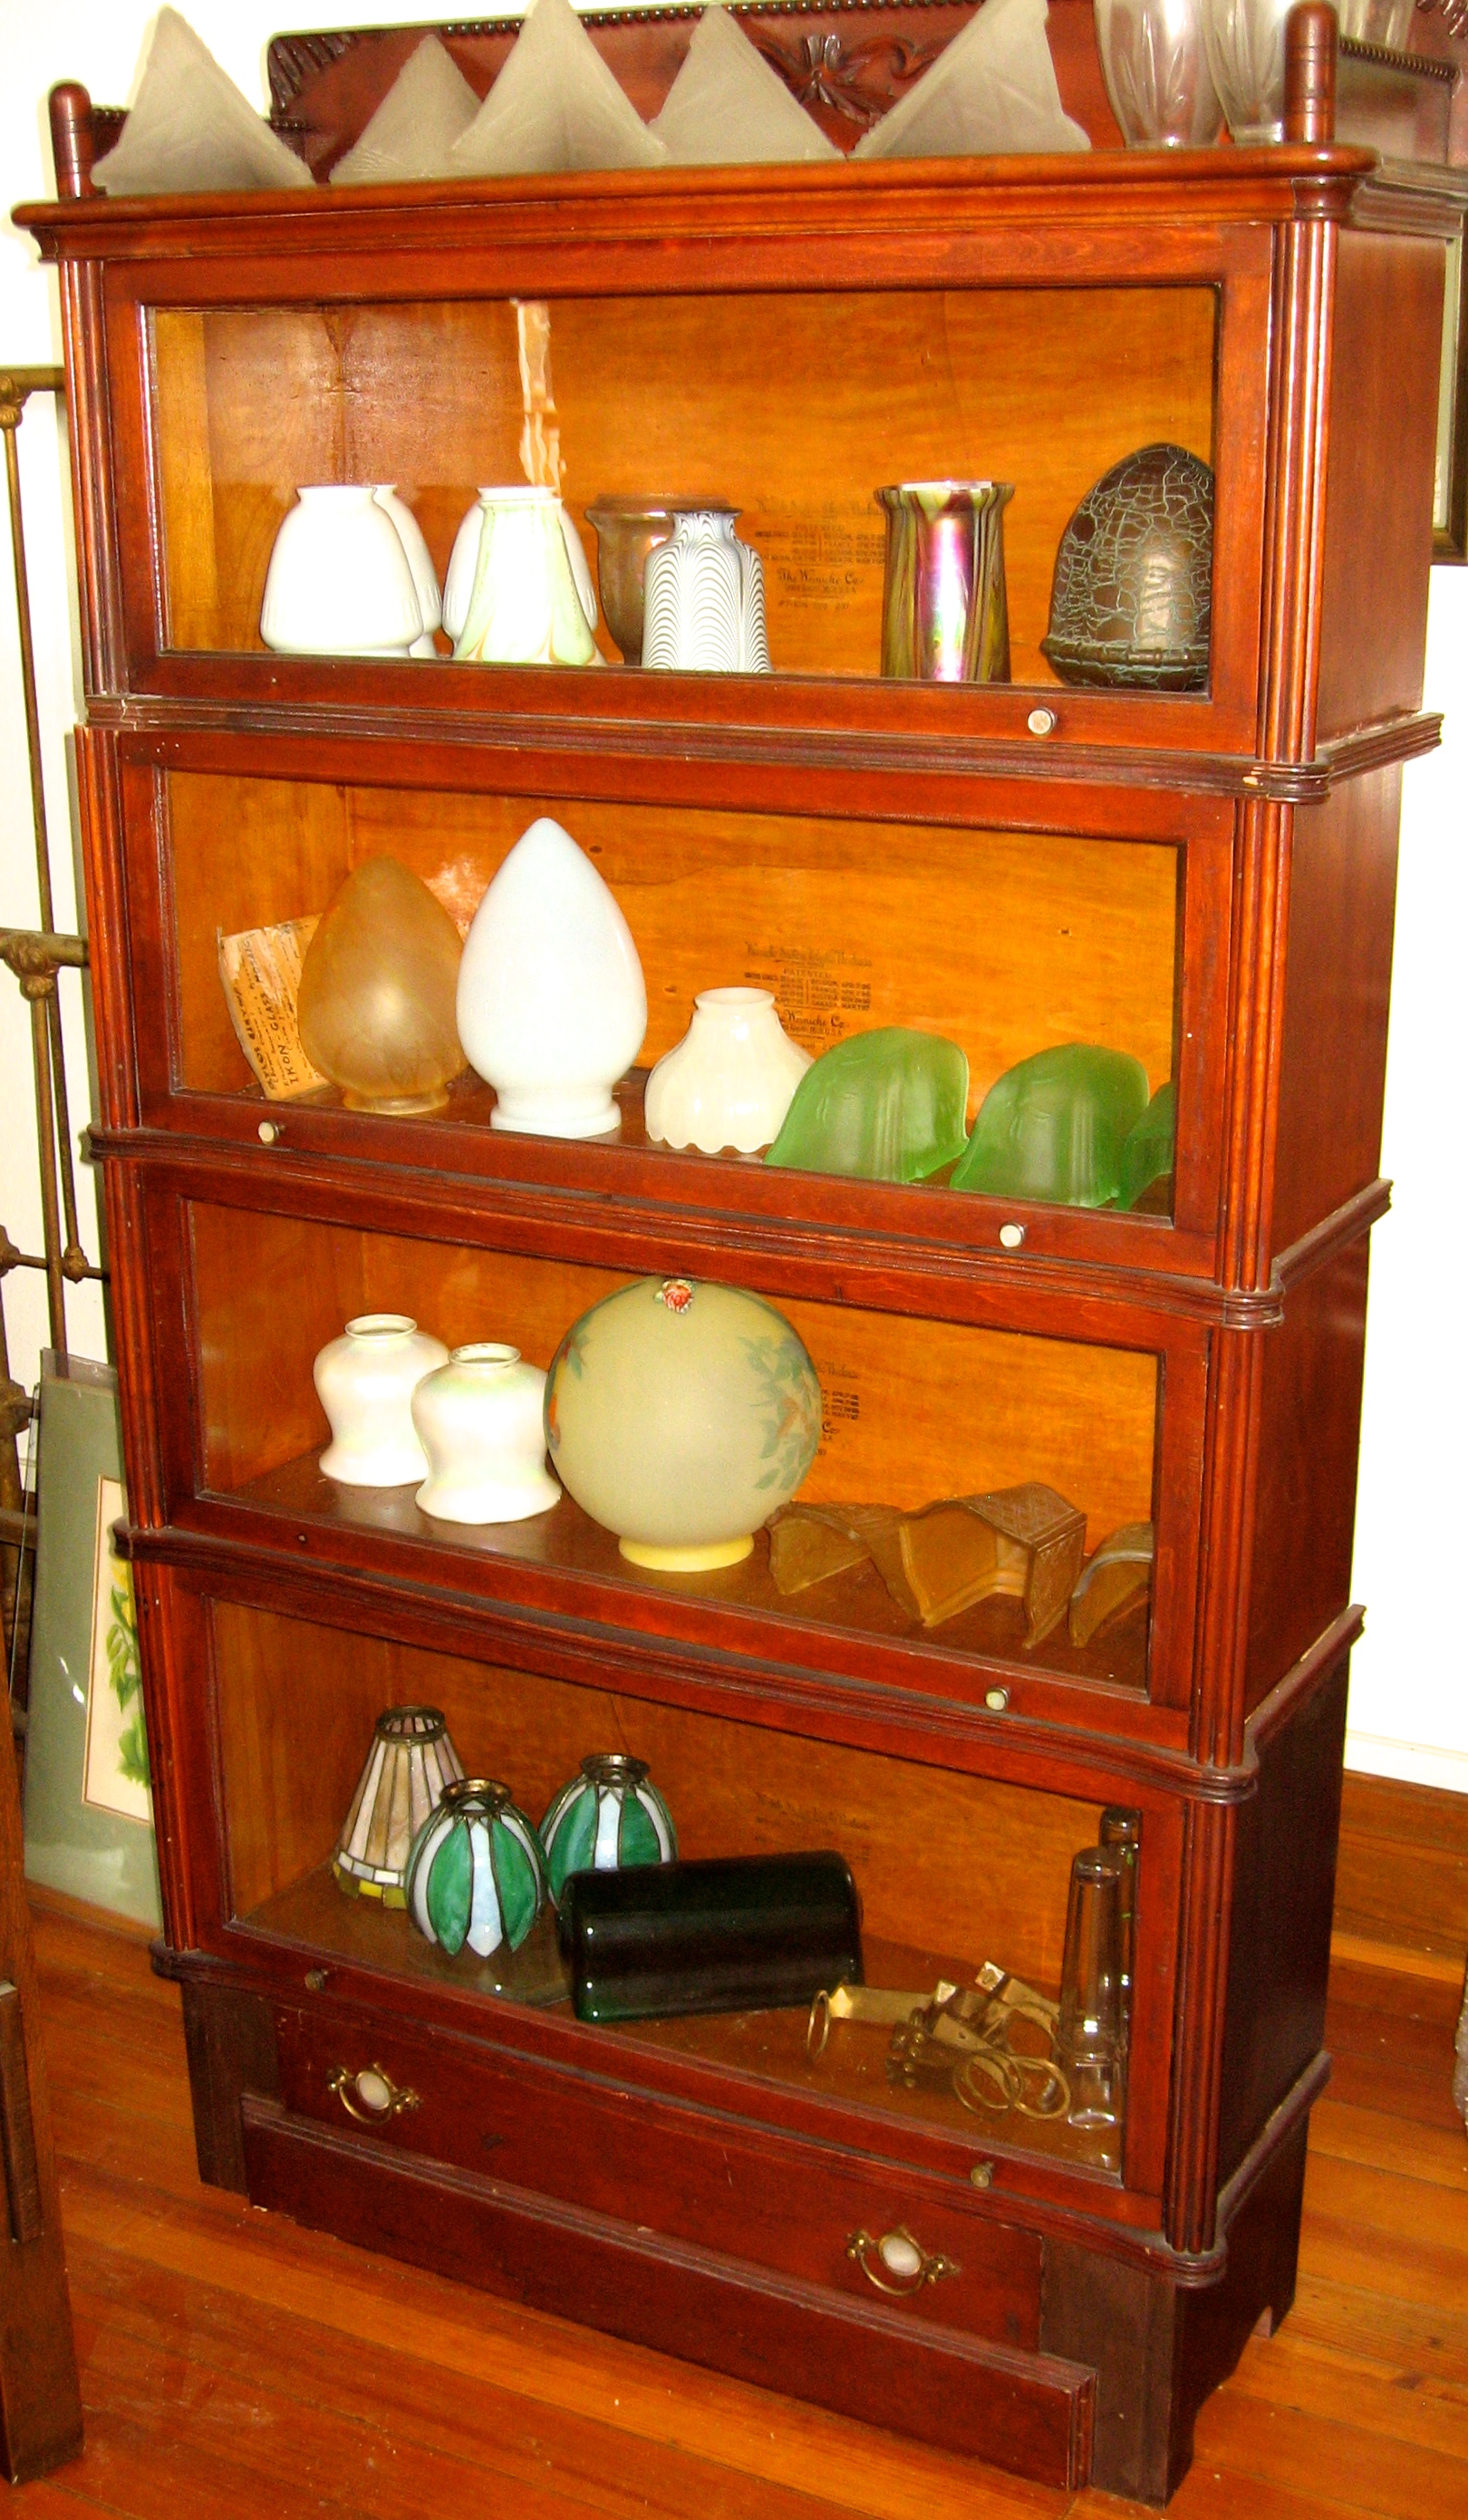 Top of the Line Globe-Wernicke Mahogany 4-stack Bookcase We Restore to Your Specifications)